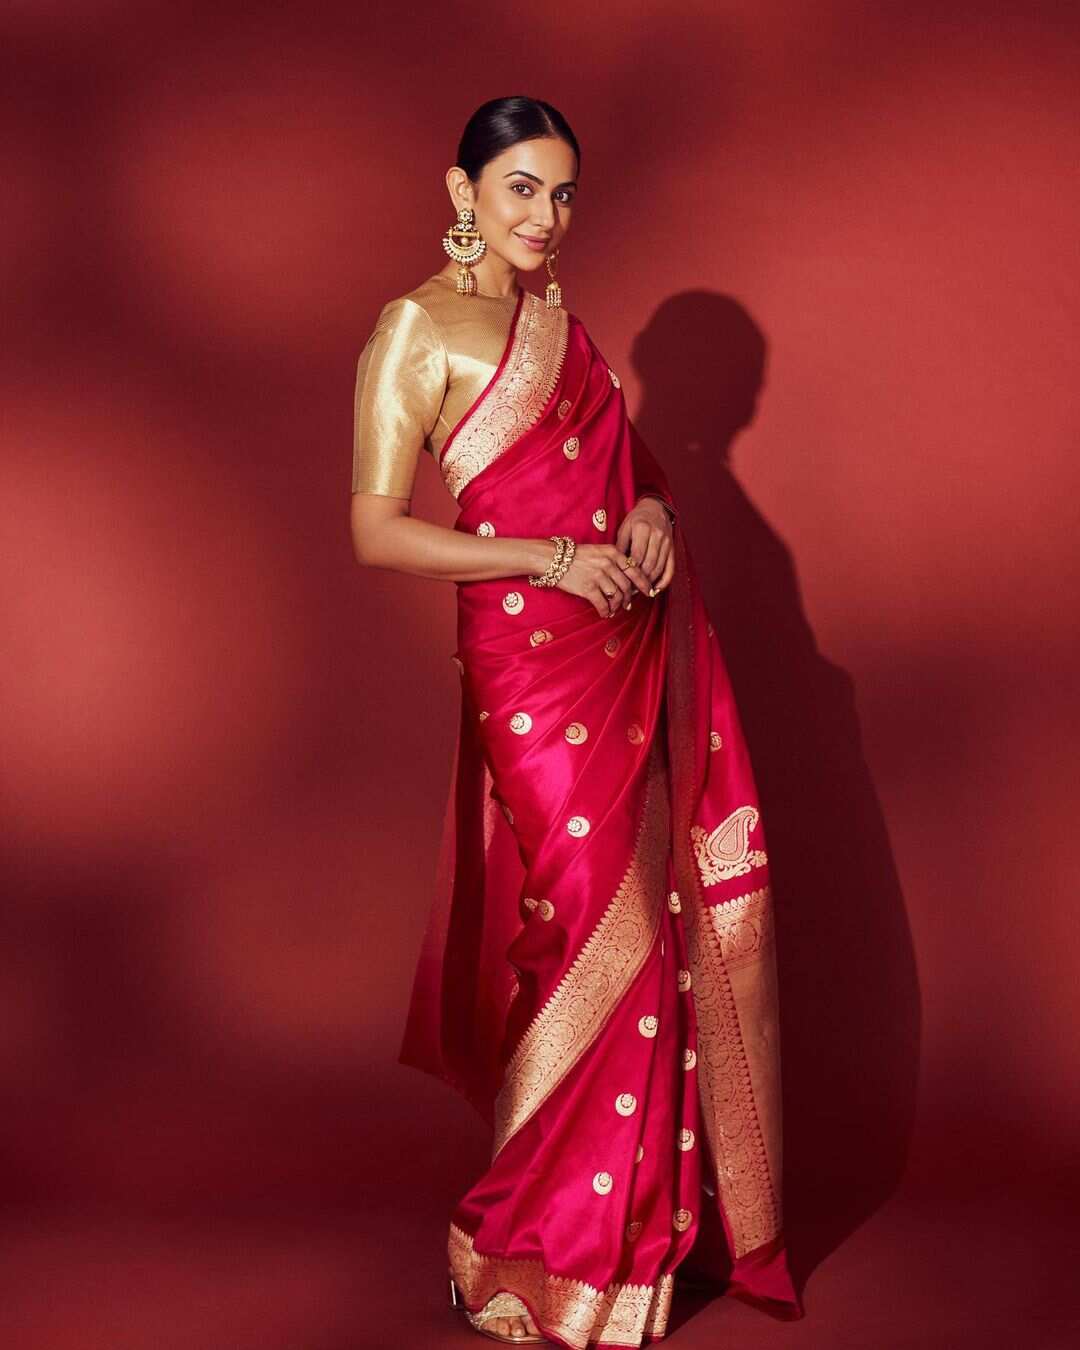 Rakul Preet Singh is a timeless beauty in a traditional red saree